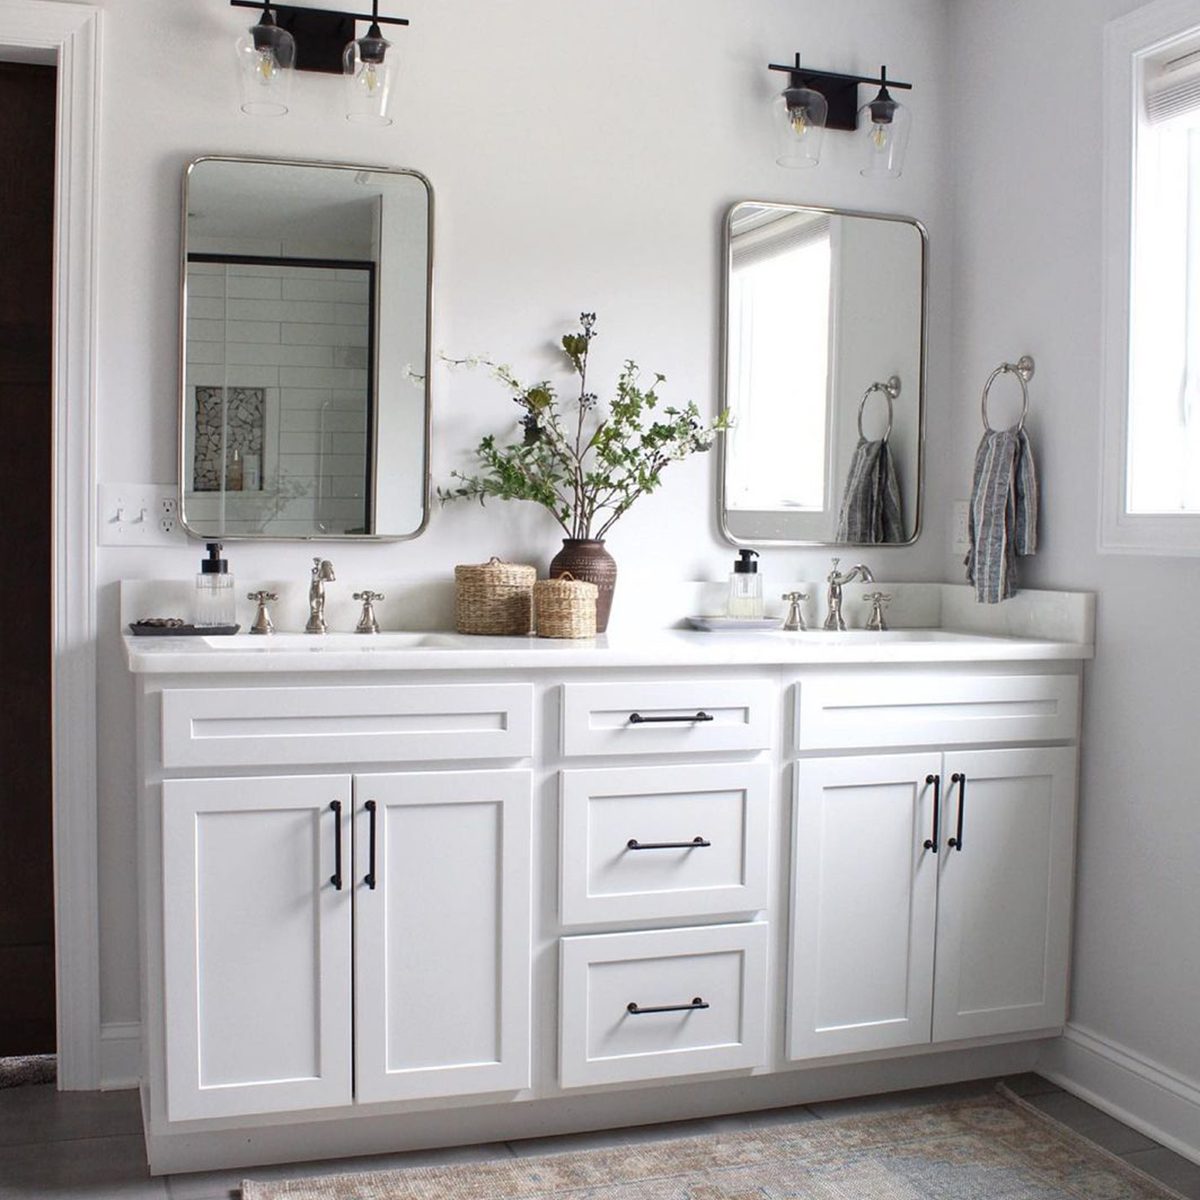 Incorporating Tech: Smart Features for Your Bathroom Vanity